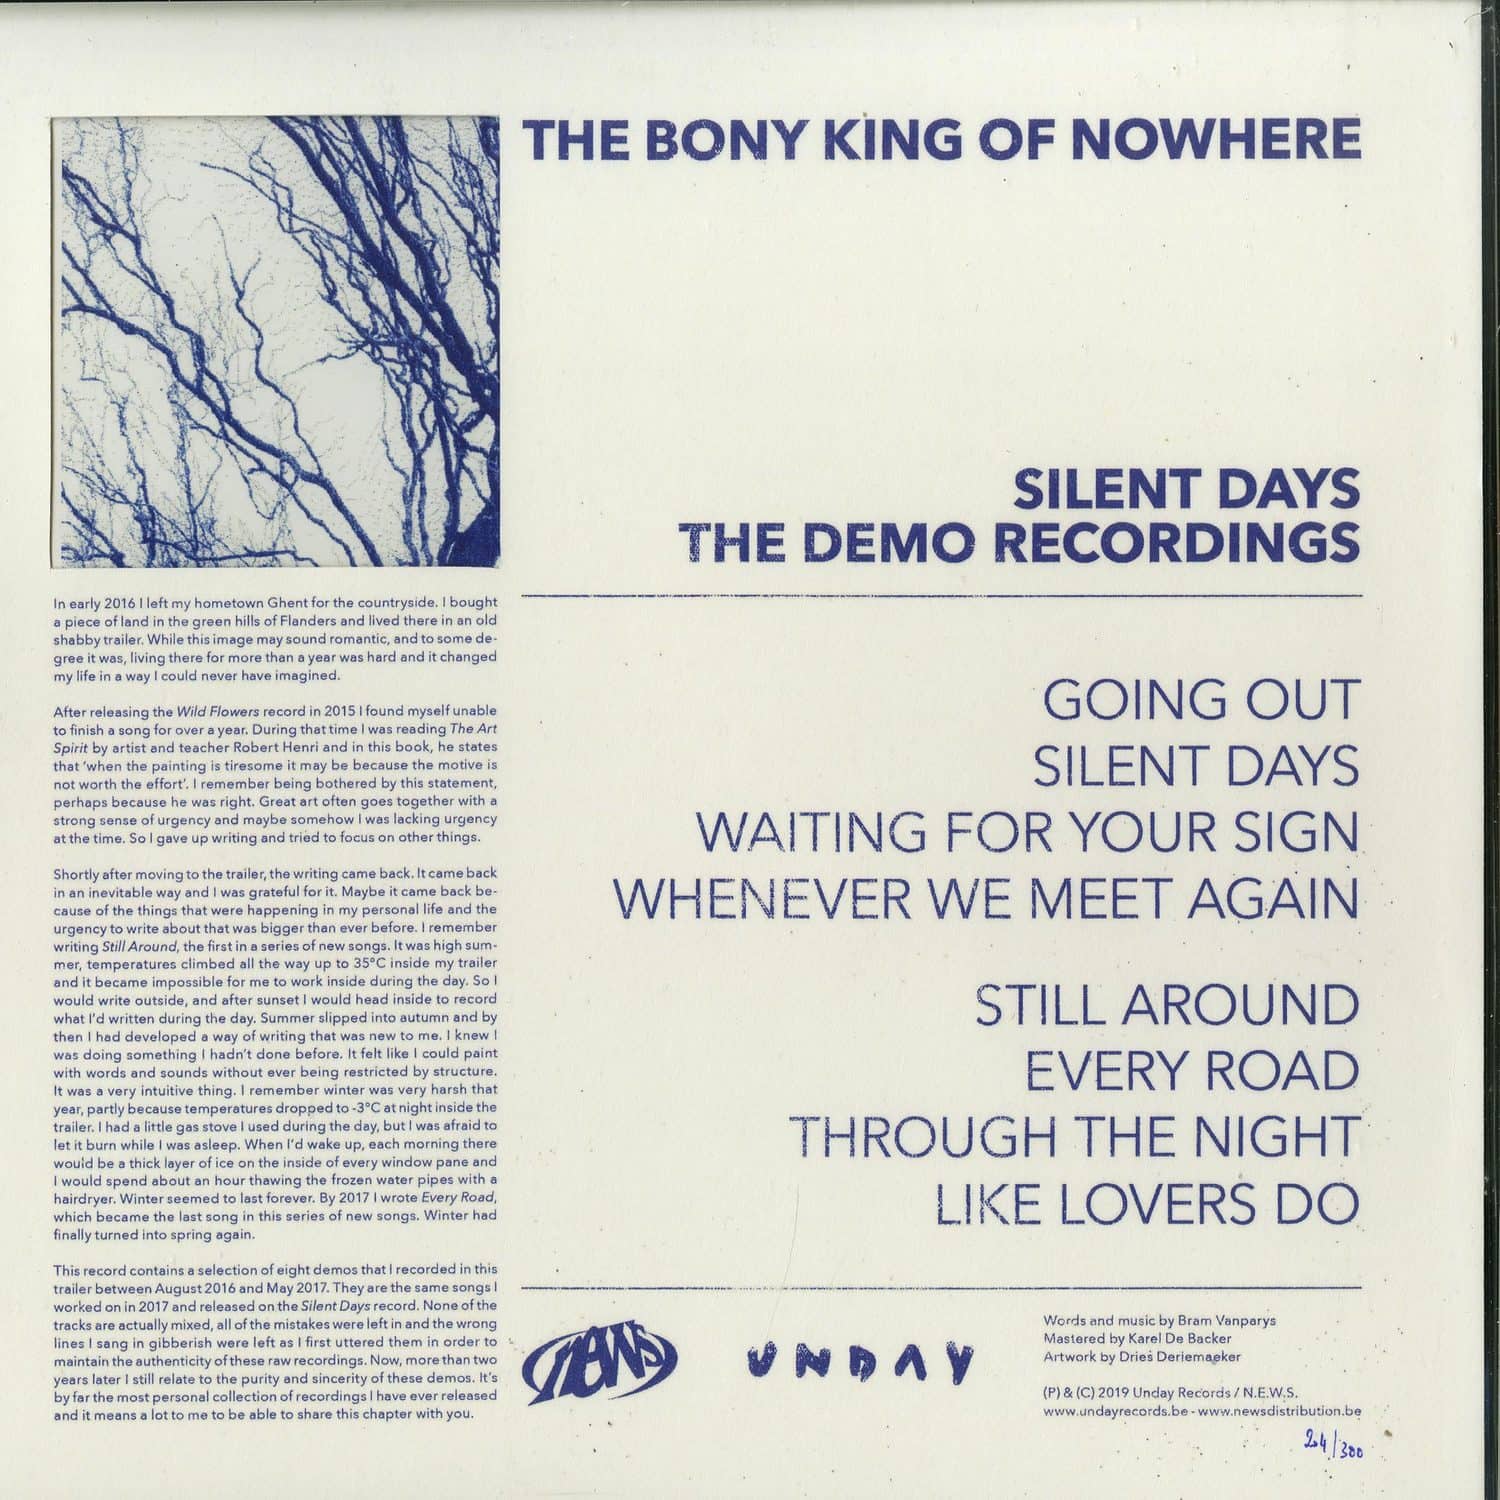 The Bony King Of Nowhere - SILENT DAYS - THE DEMO RECORDINGS 